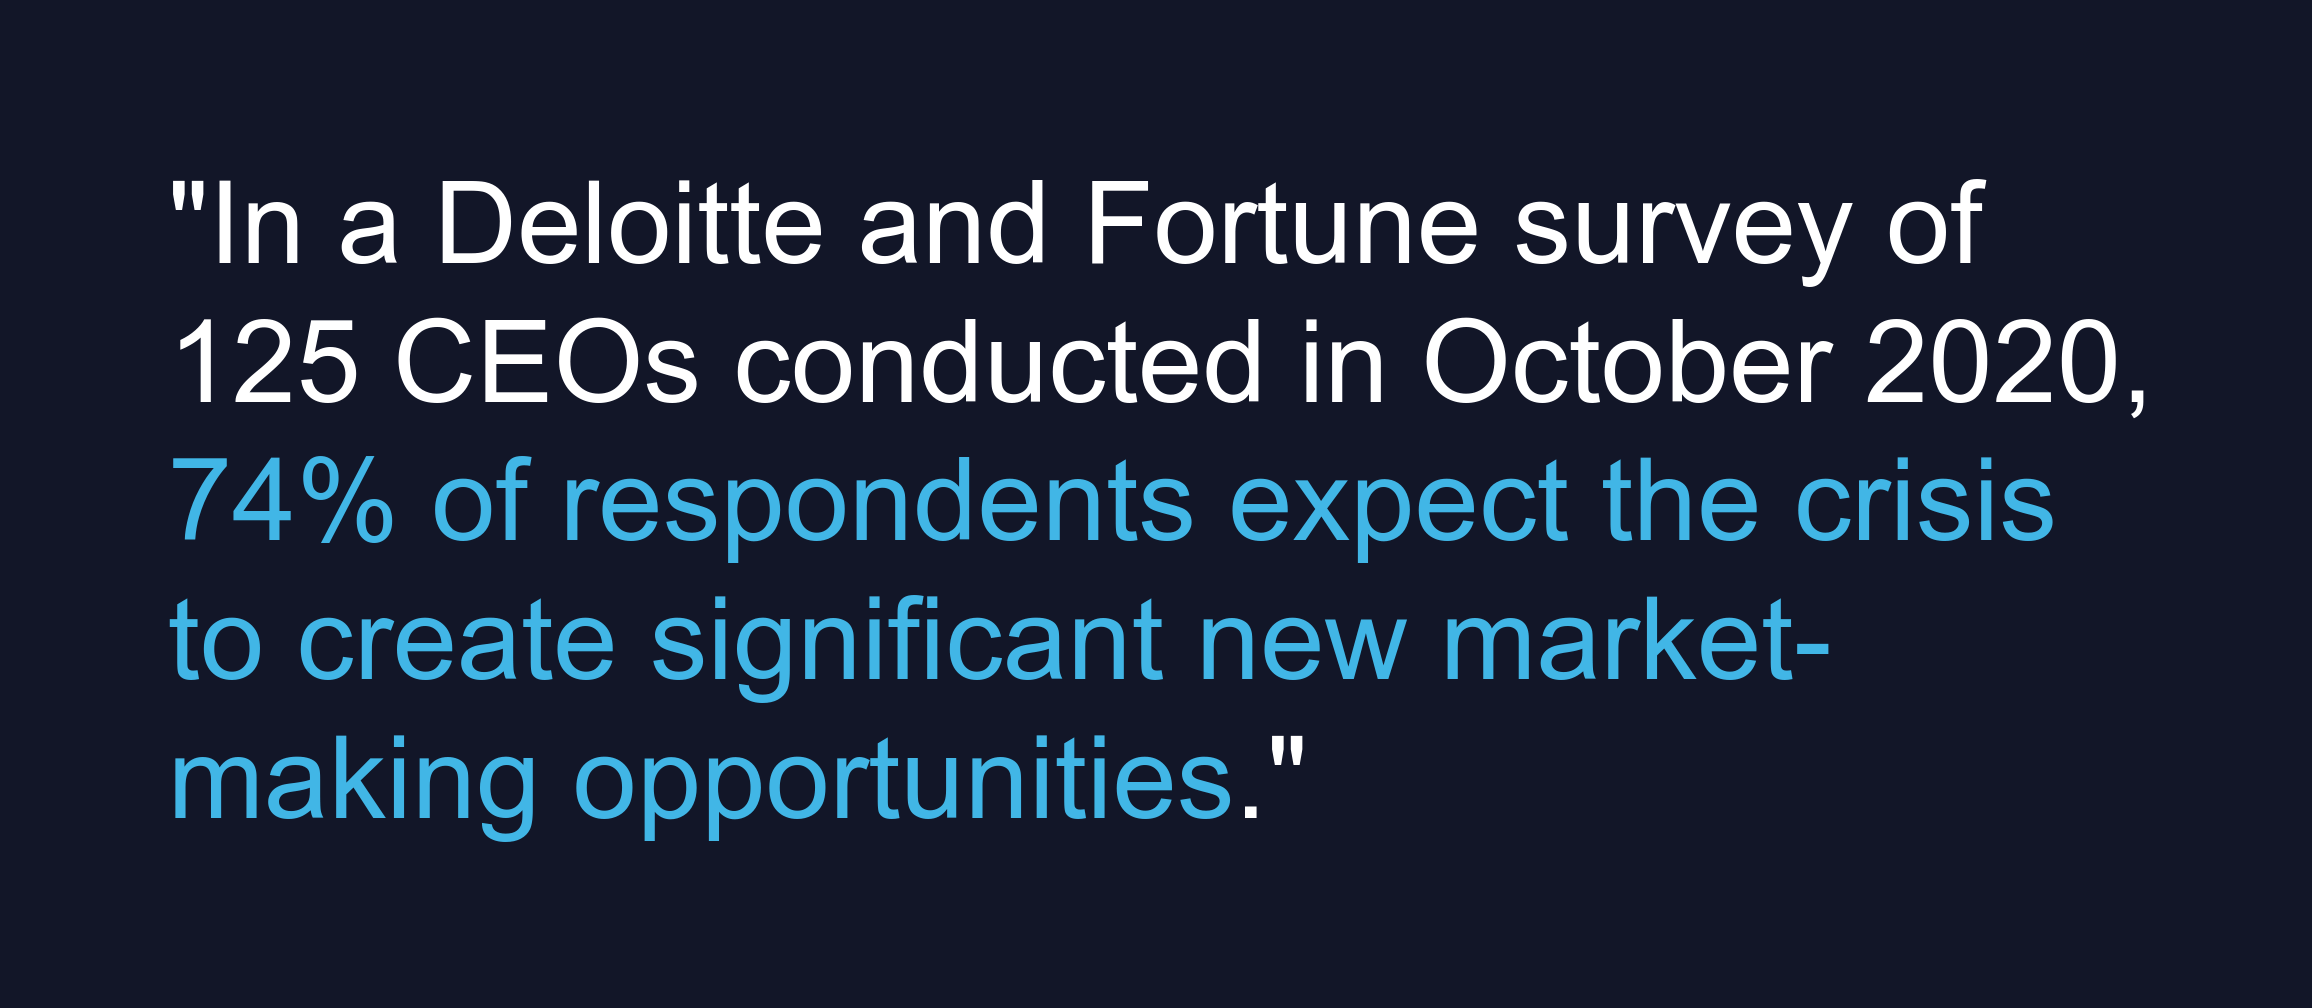 In a Deloitte and fortune survey of 125 CEOs conducted in October 2020, 74% of respondents expect the crisis to create significant new market-making opportunities.